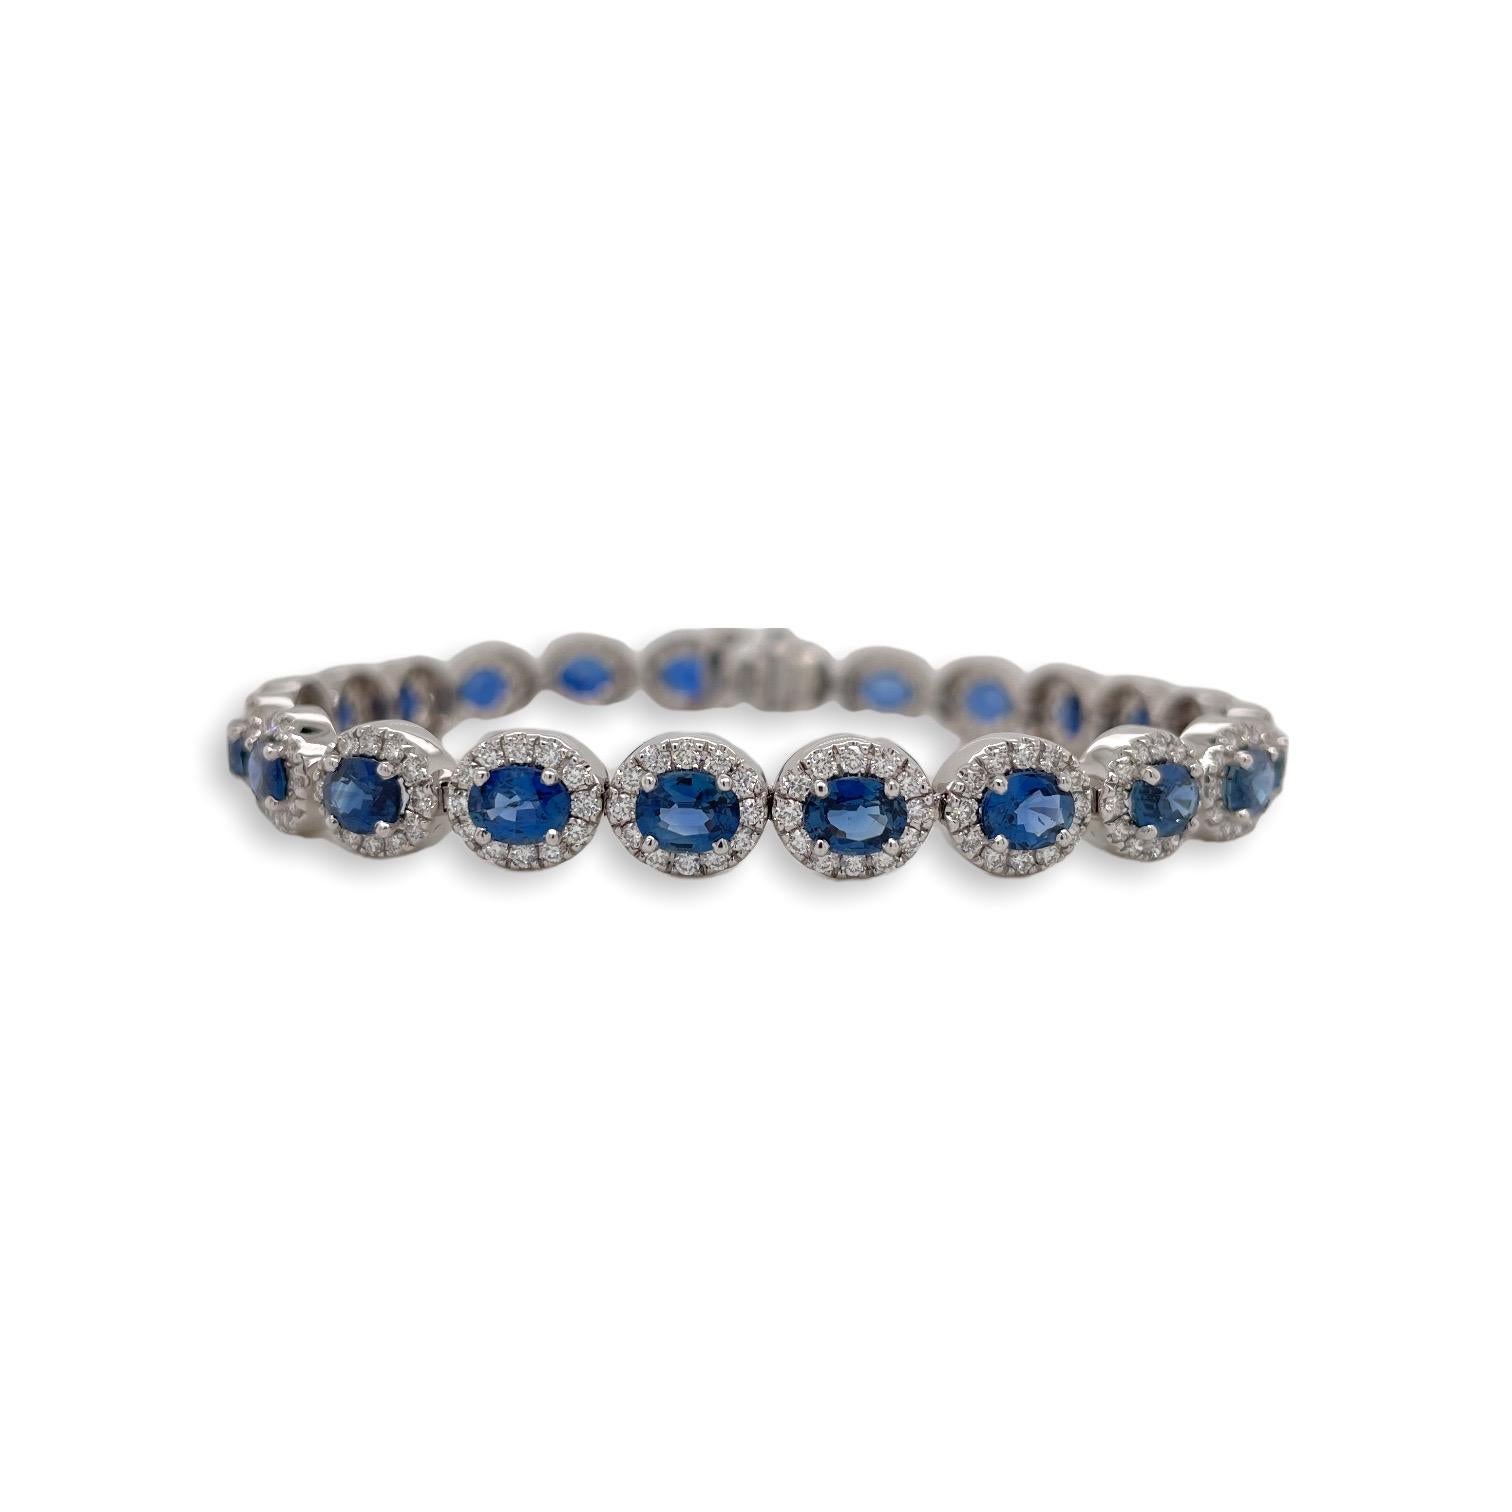 Bracelet contains 22 finely matched oval brilliant sapphires, 9.87tcw and 264 round brilliant diamonds, 2.65tcw.  Diamonds are colorless and VS2 in clarity, excellent cut. All stones are mounted in handmade prong settings. Bracelet measures 7